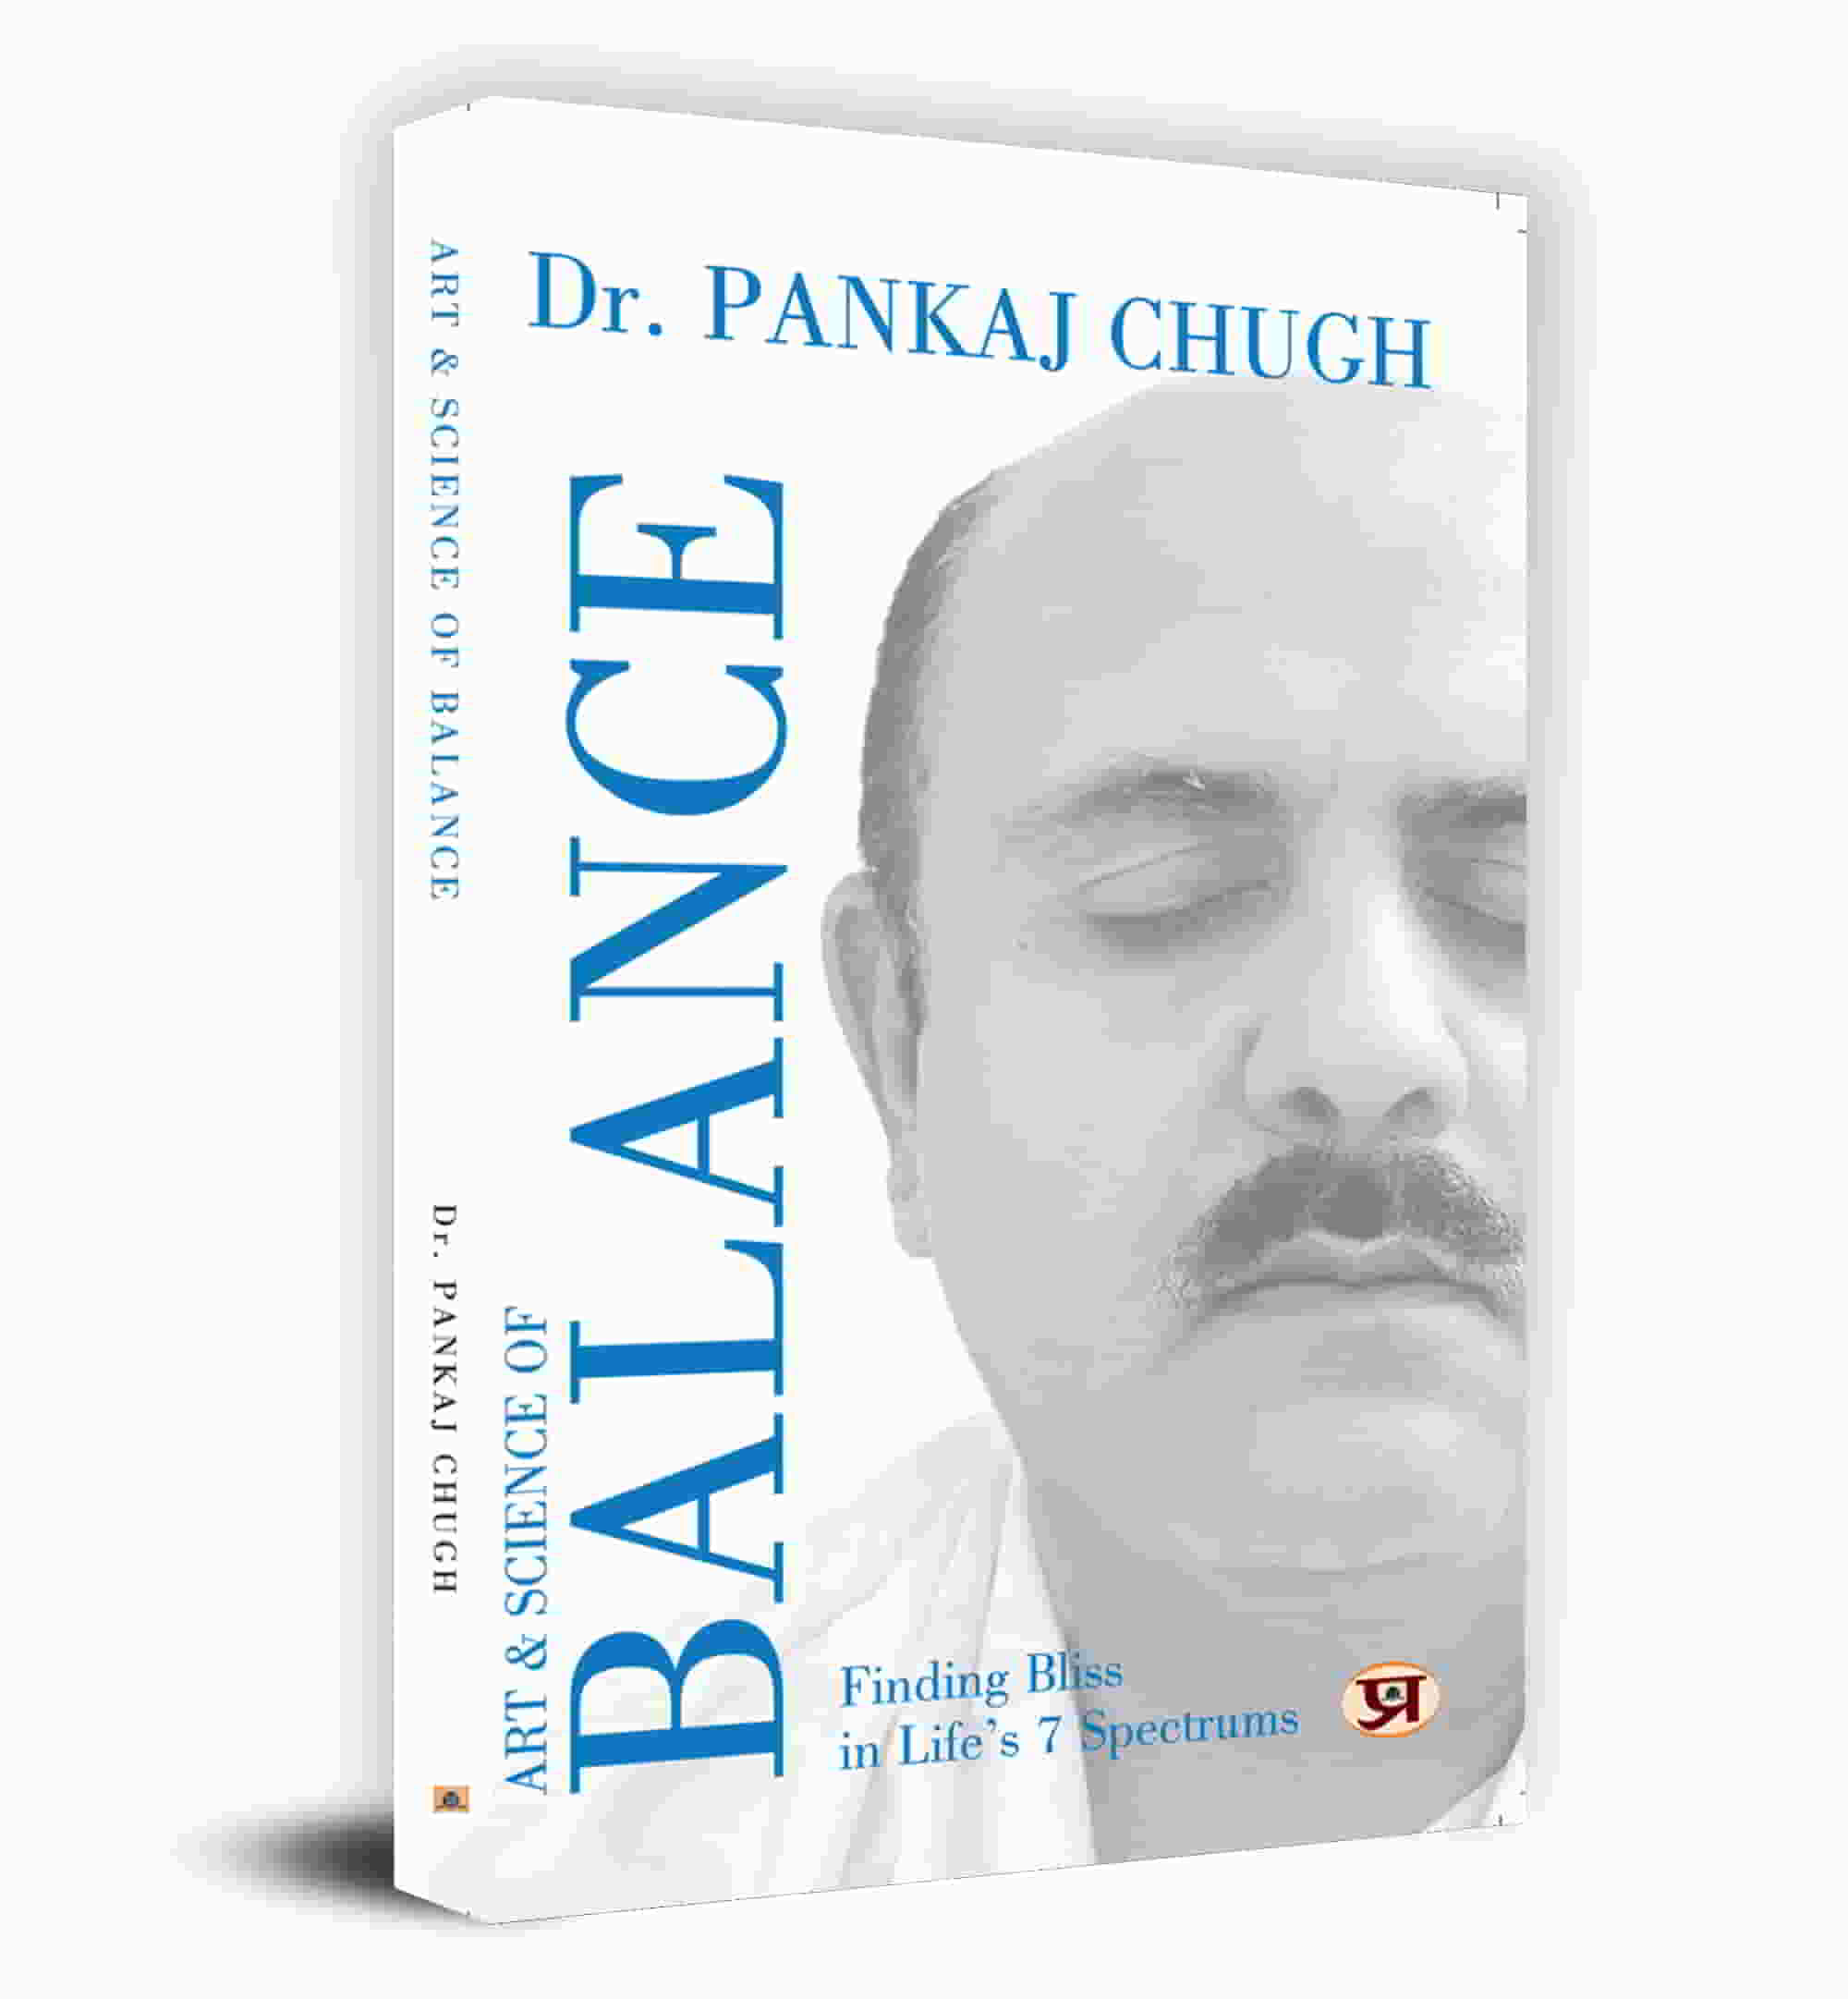 Art & Science Of Balance: Finding Bliss in Life’s 7 Spectrums